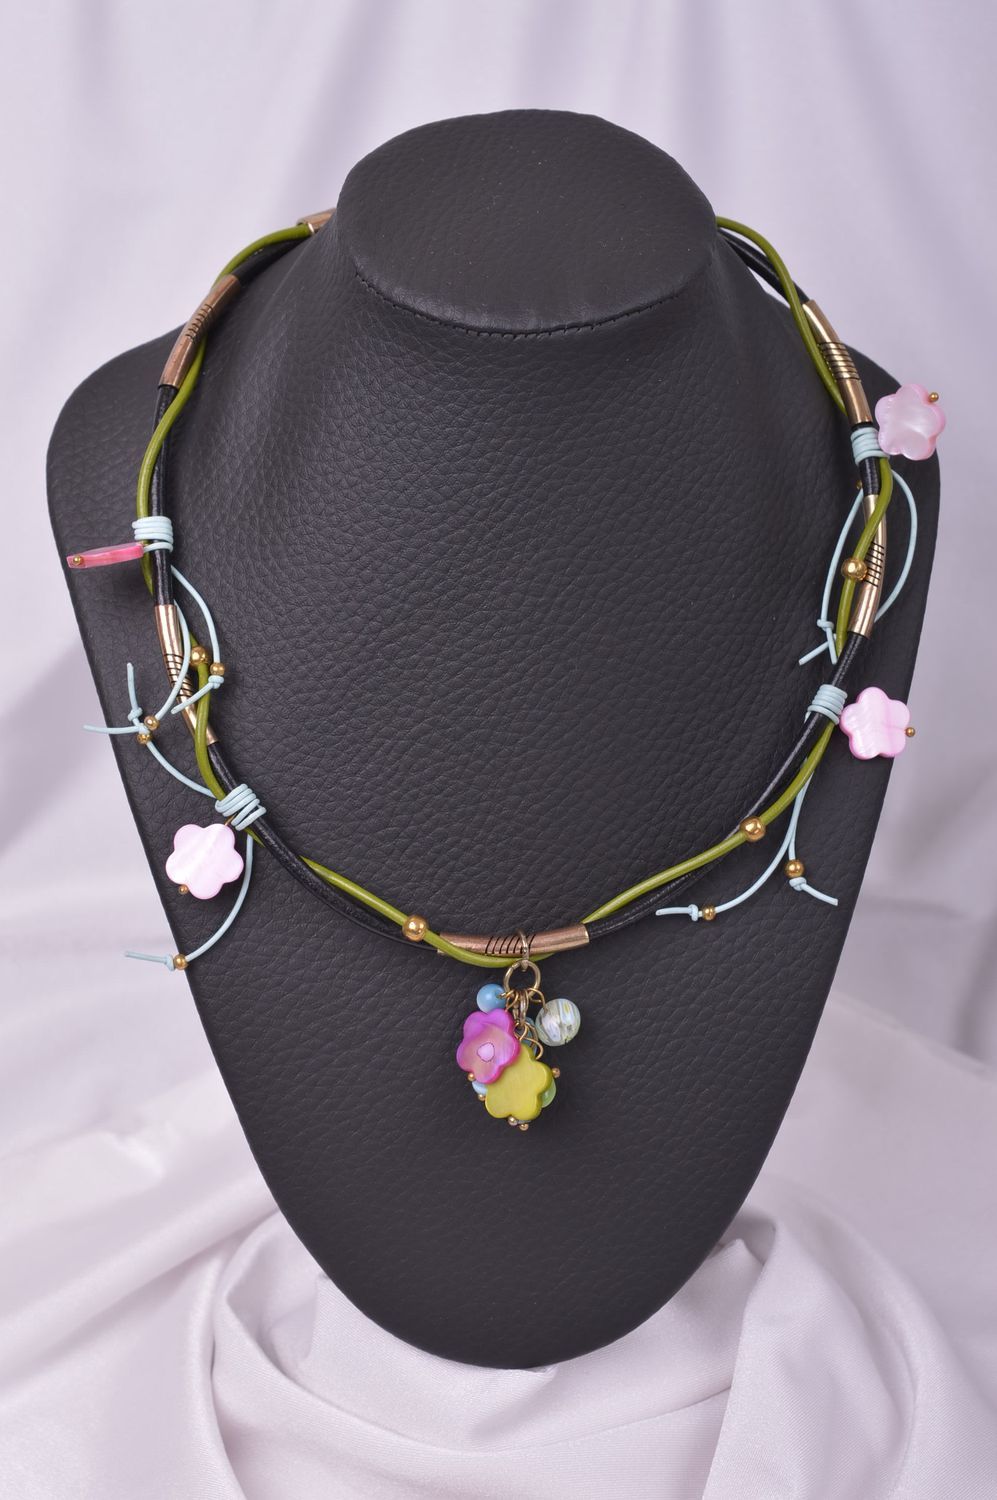 Handmade beaded stylish necklace unusual accessory necklace with natural stone photo 1